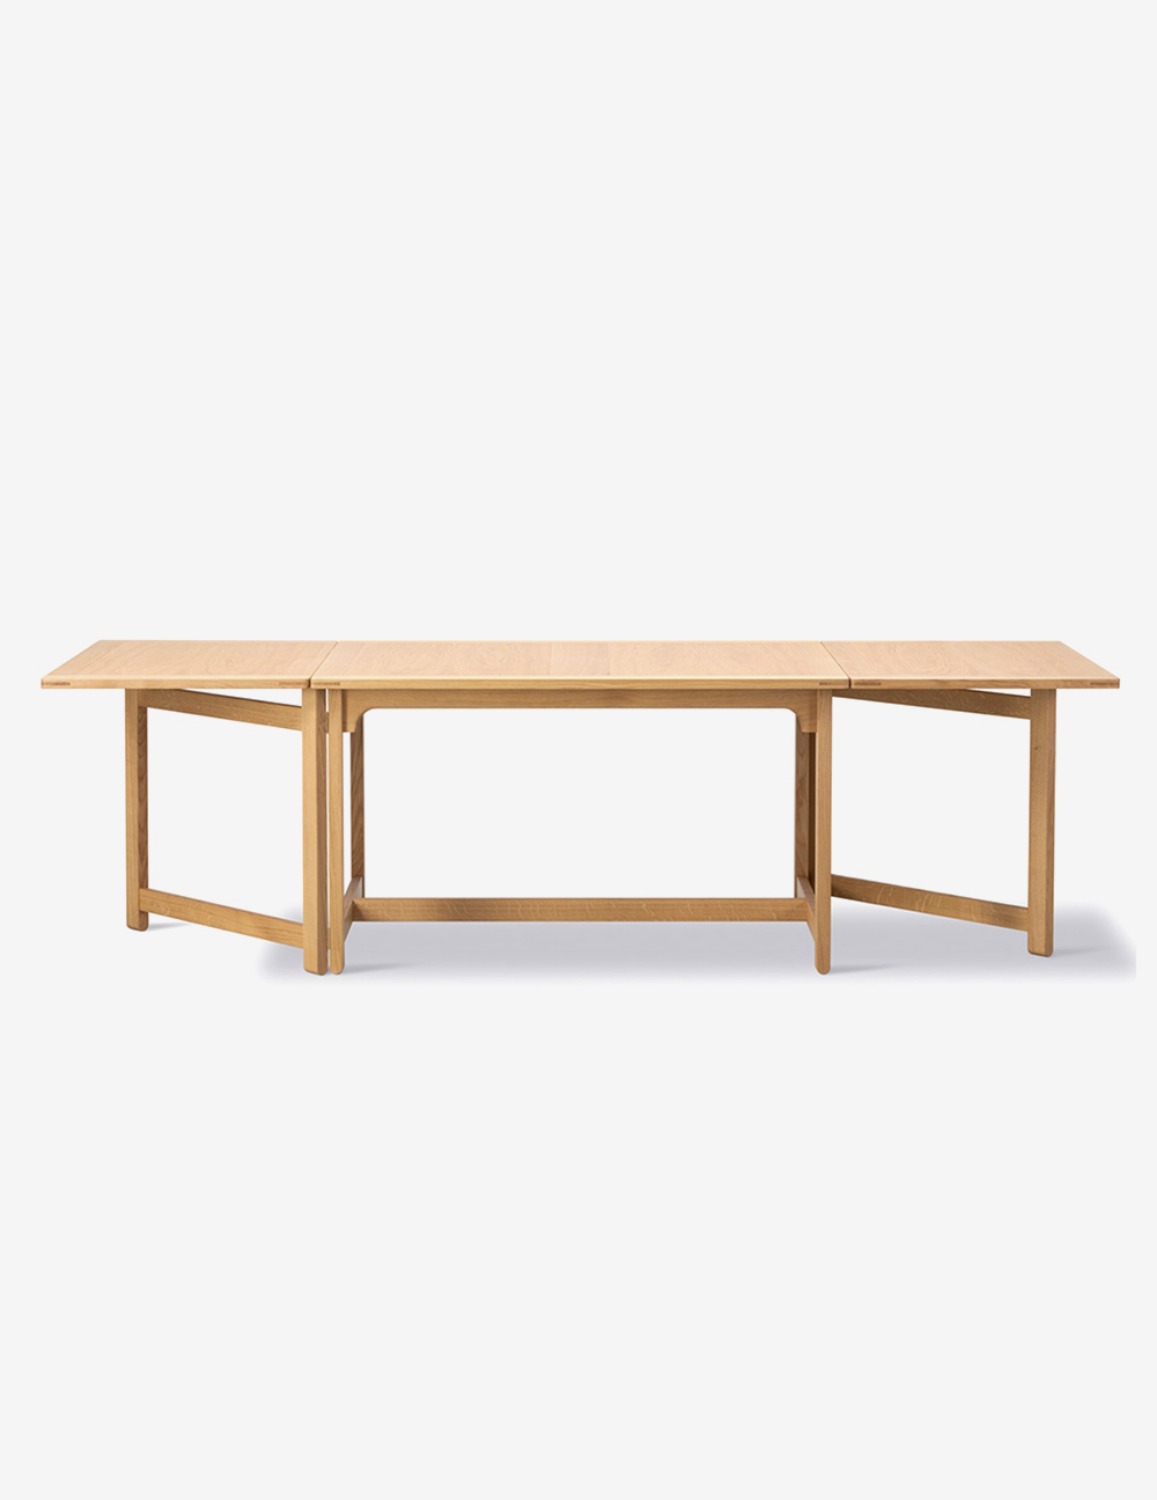 [Fredericia] Library table